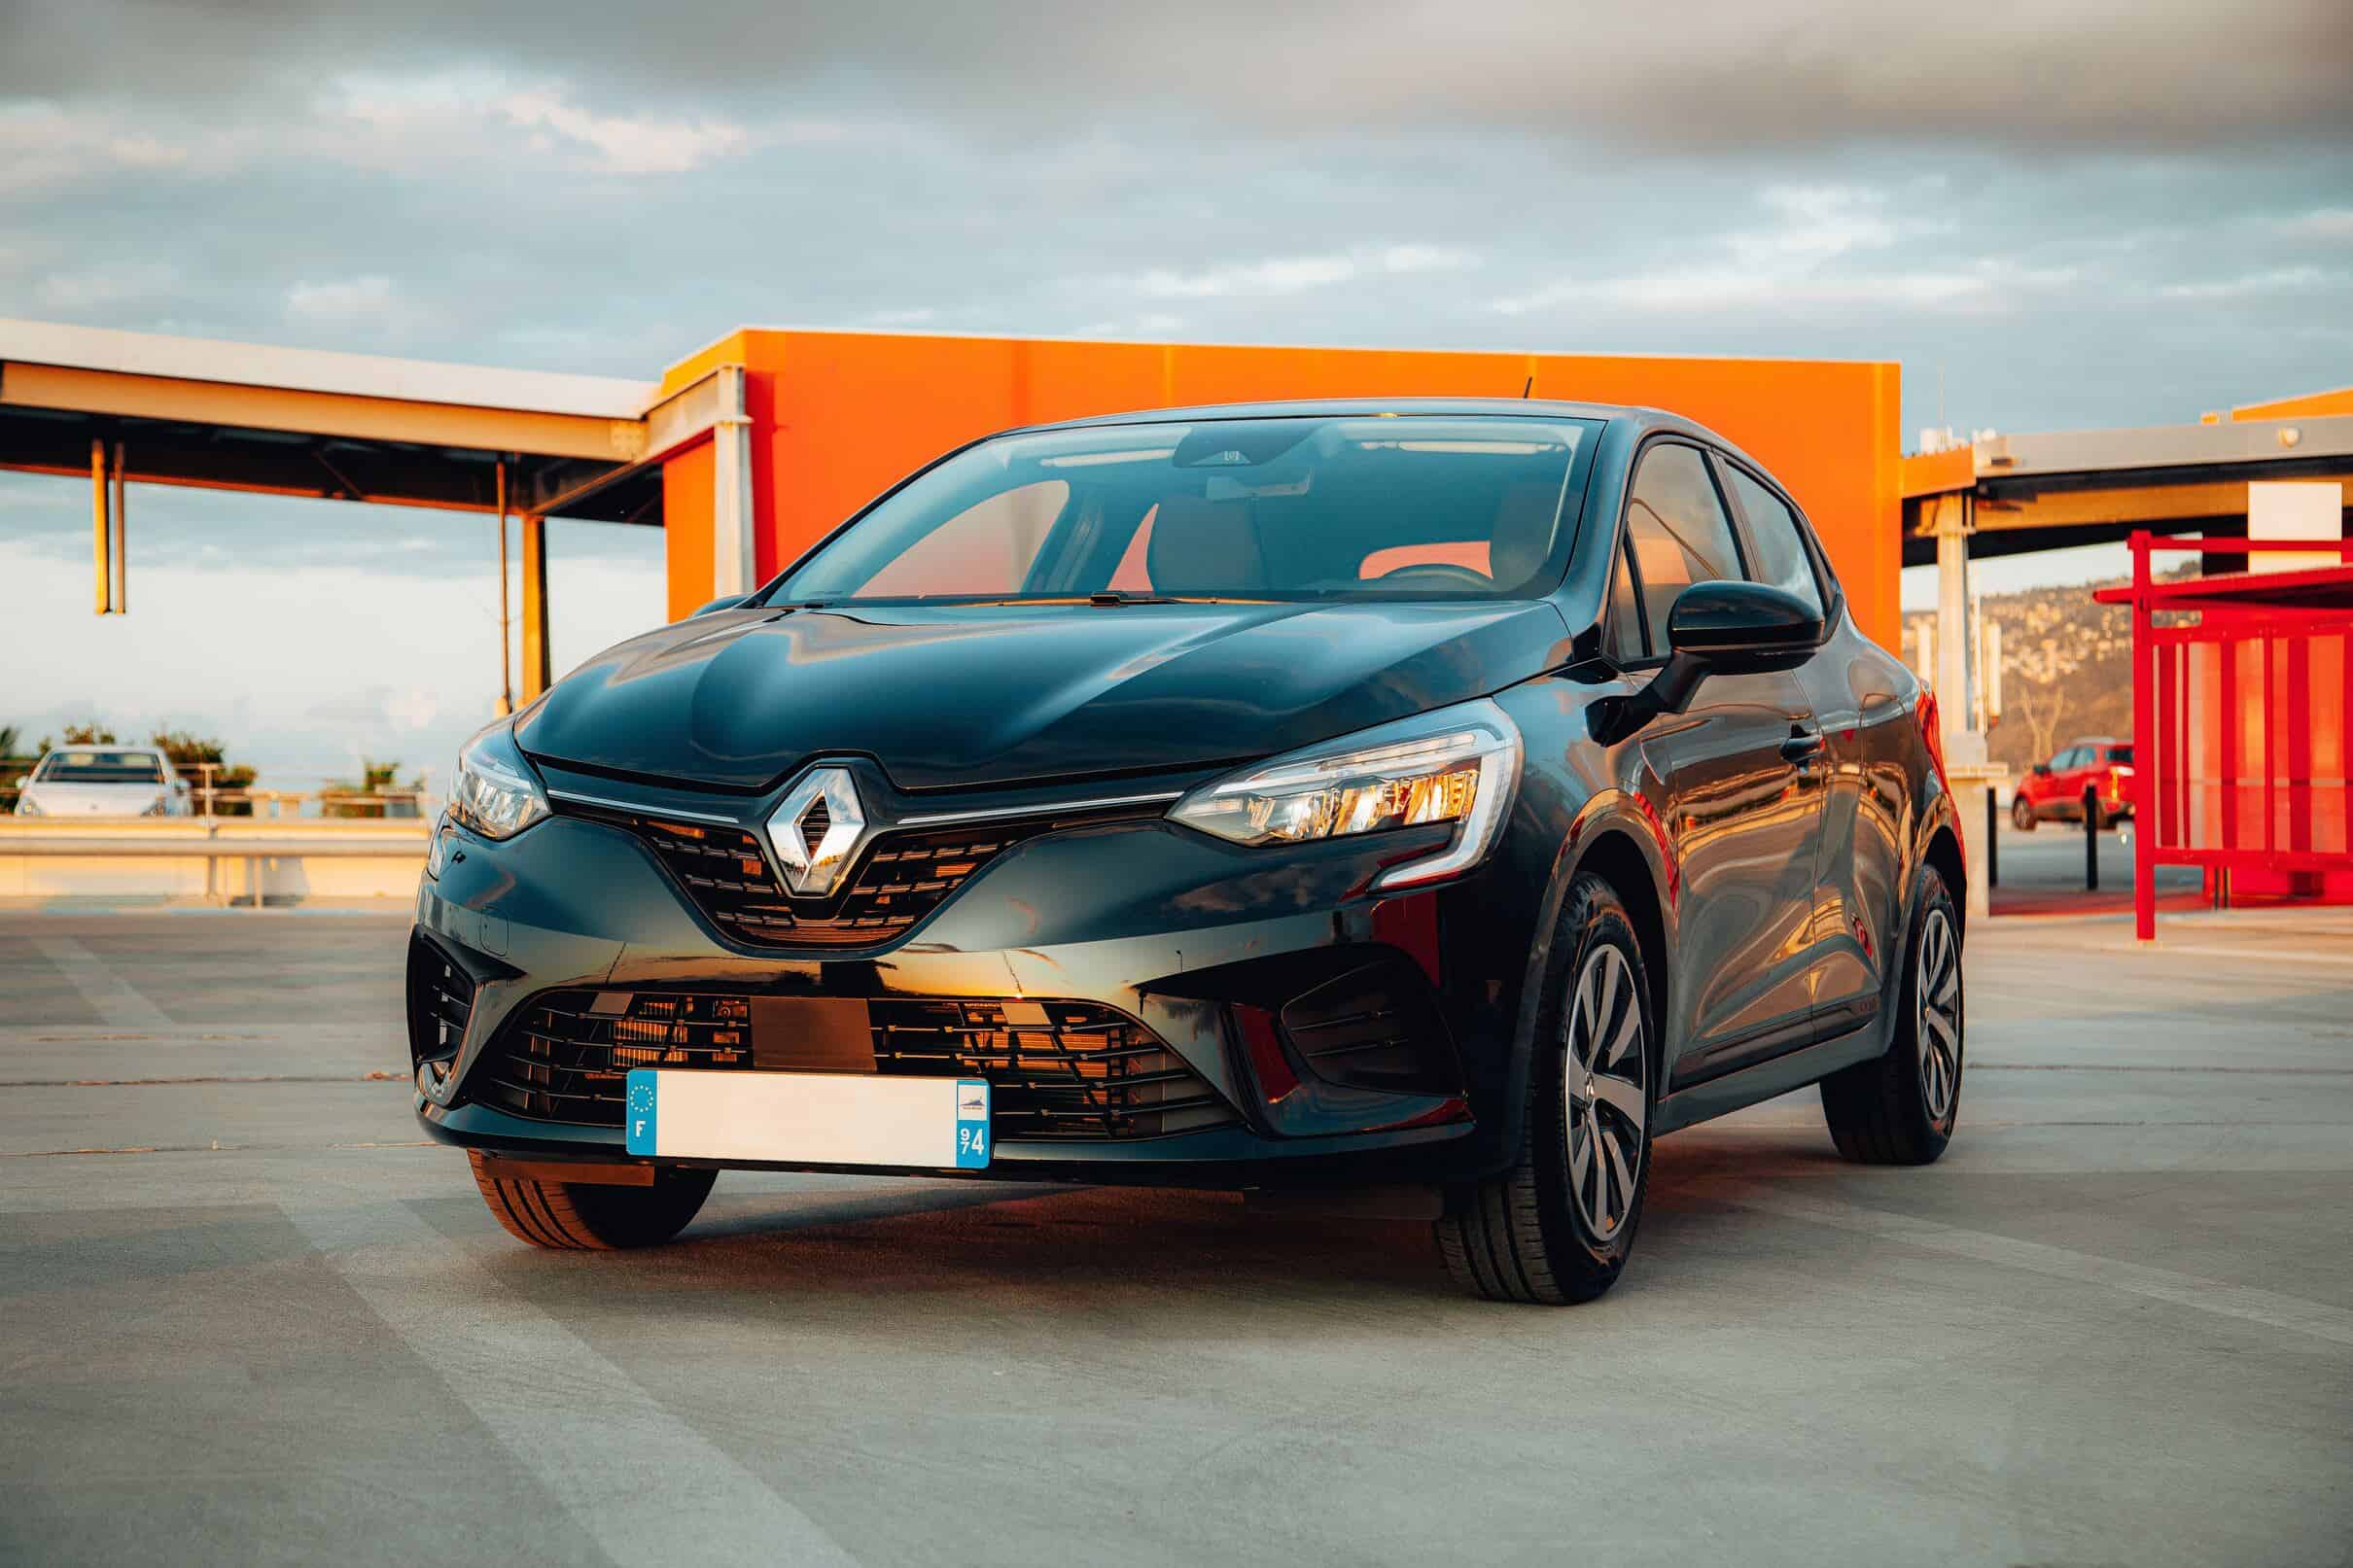 Renault Clio - A Stylish Compact Car